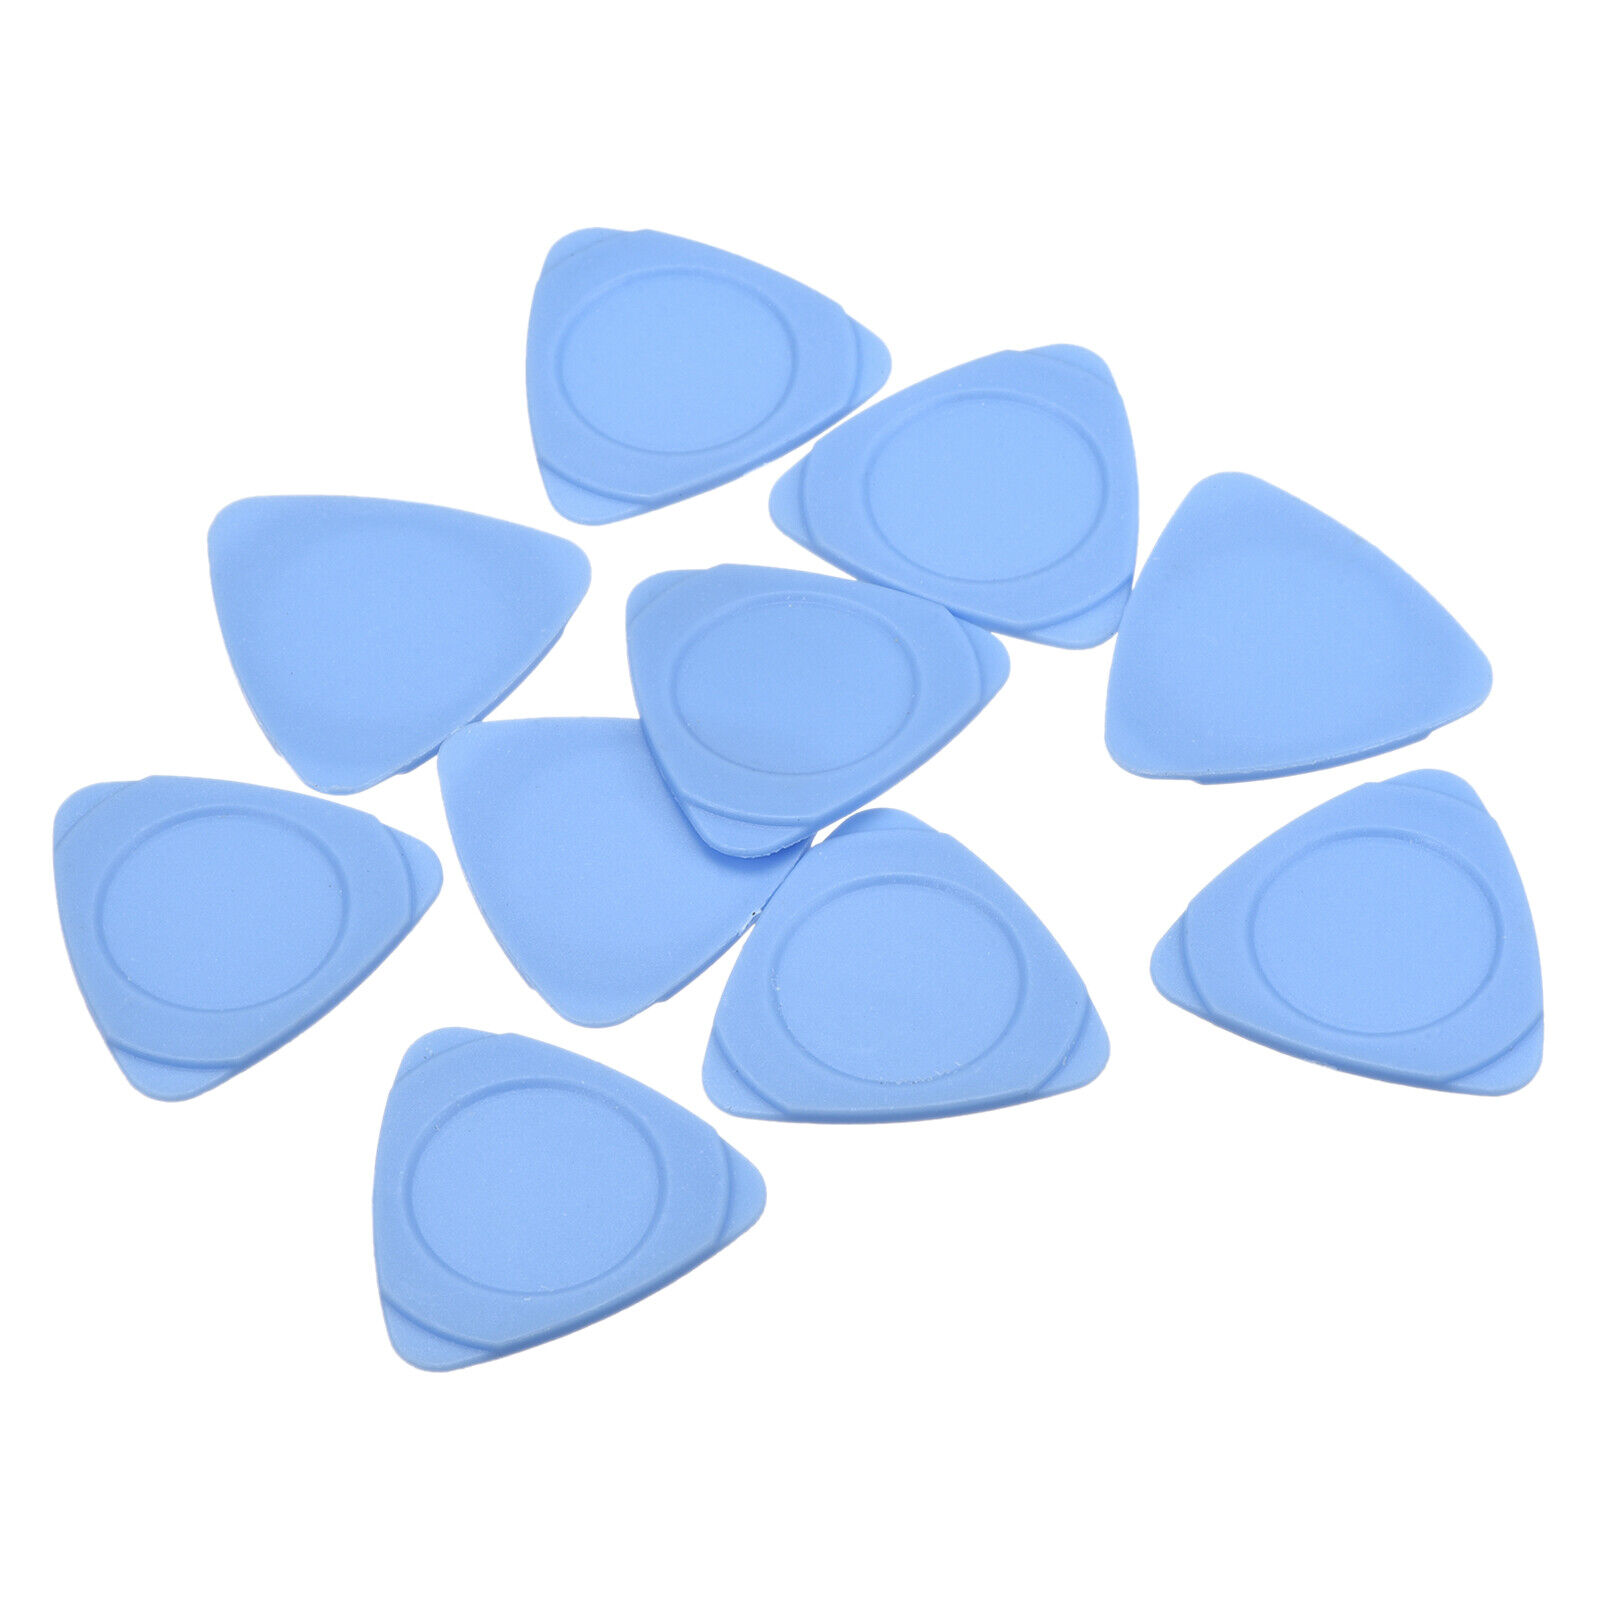 Phone Pry Opening Tools Plastic 10pcs Light Blue 1.7mm Thick